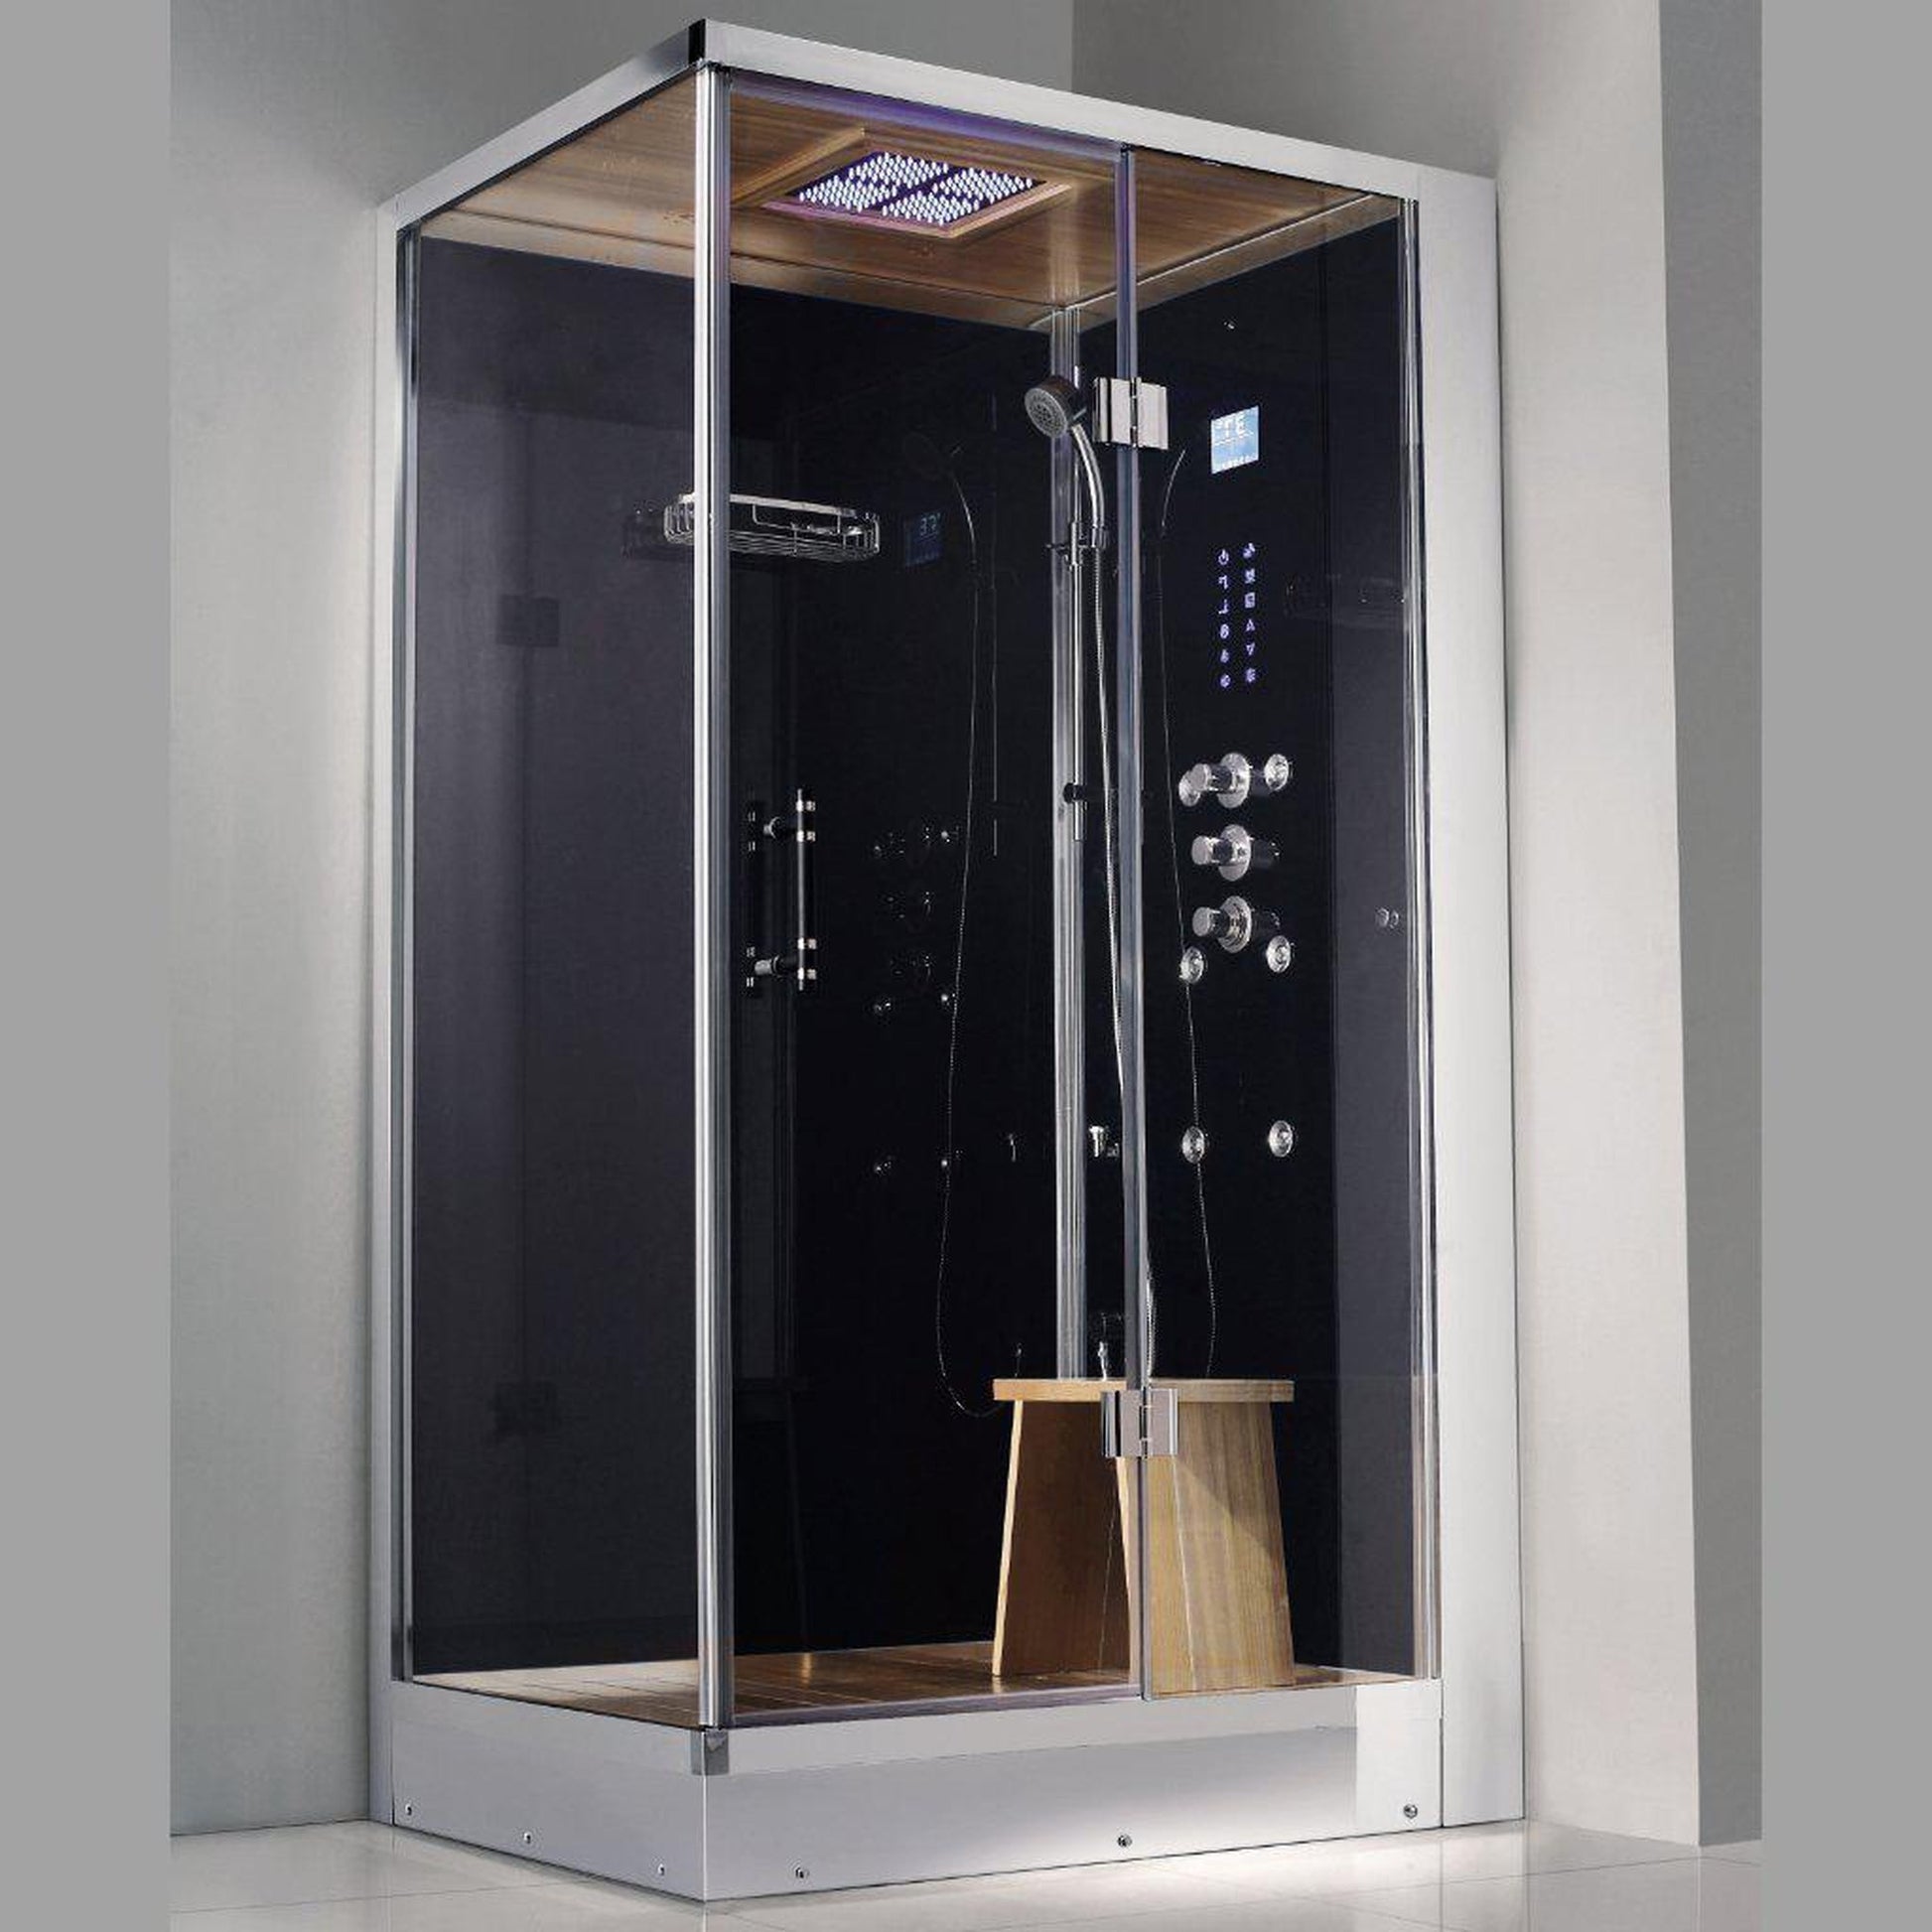 Athena 47" x 35" x 89" One Person Framed Rectangle Right Handed Steam Shower With Hinged Door & 6 Massage Jets